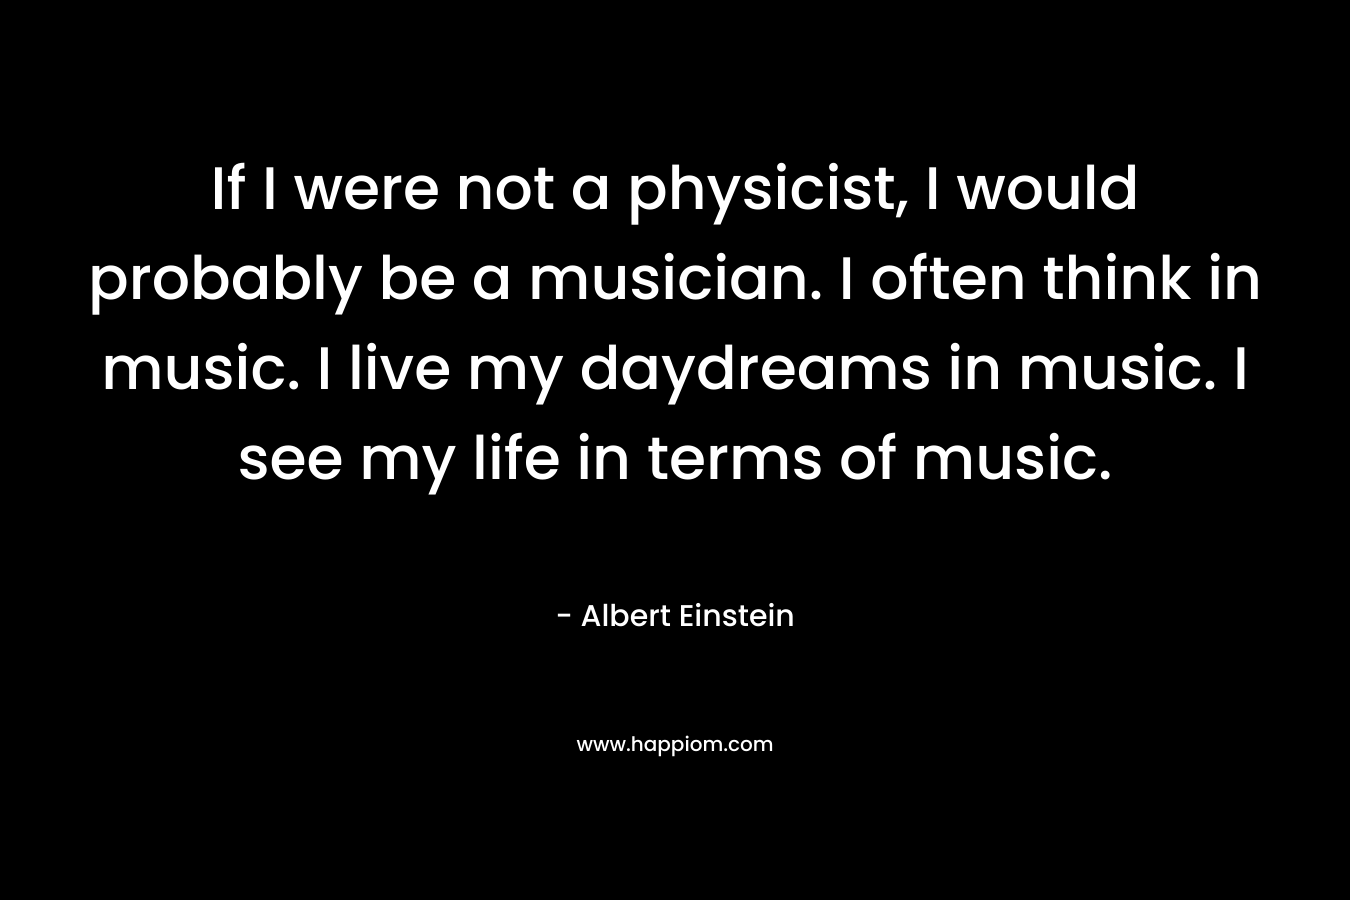 If I were not a physicist, I would probably be a musician. I often think in music. I live my daydreams in music. I see my life in terms of music. – Albert Einstein